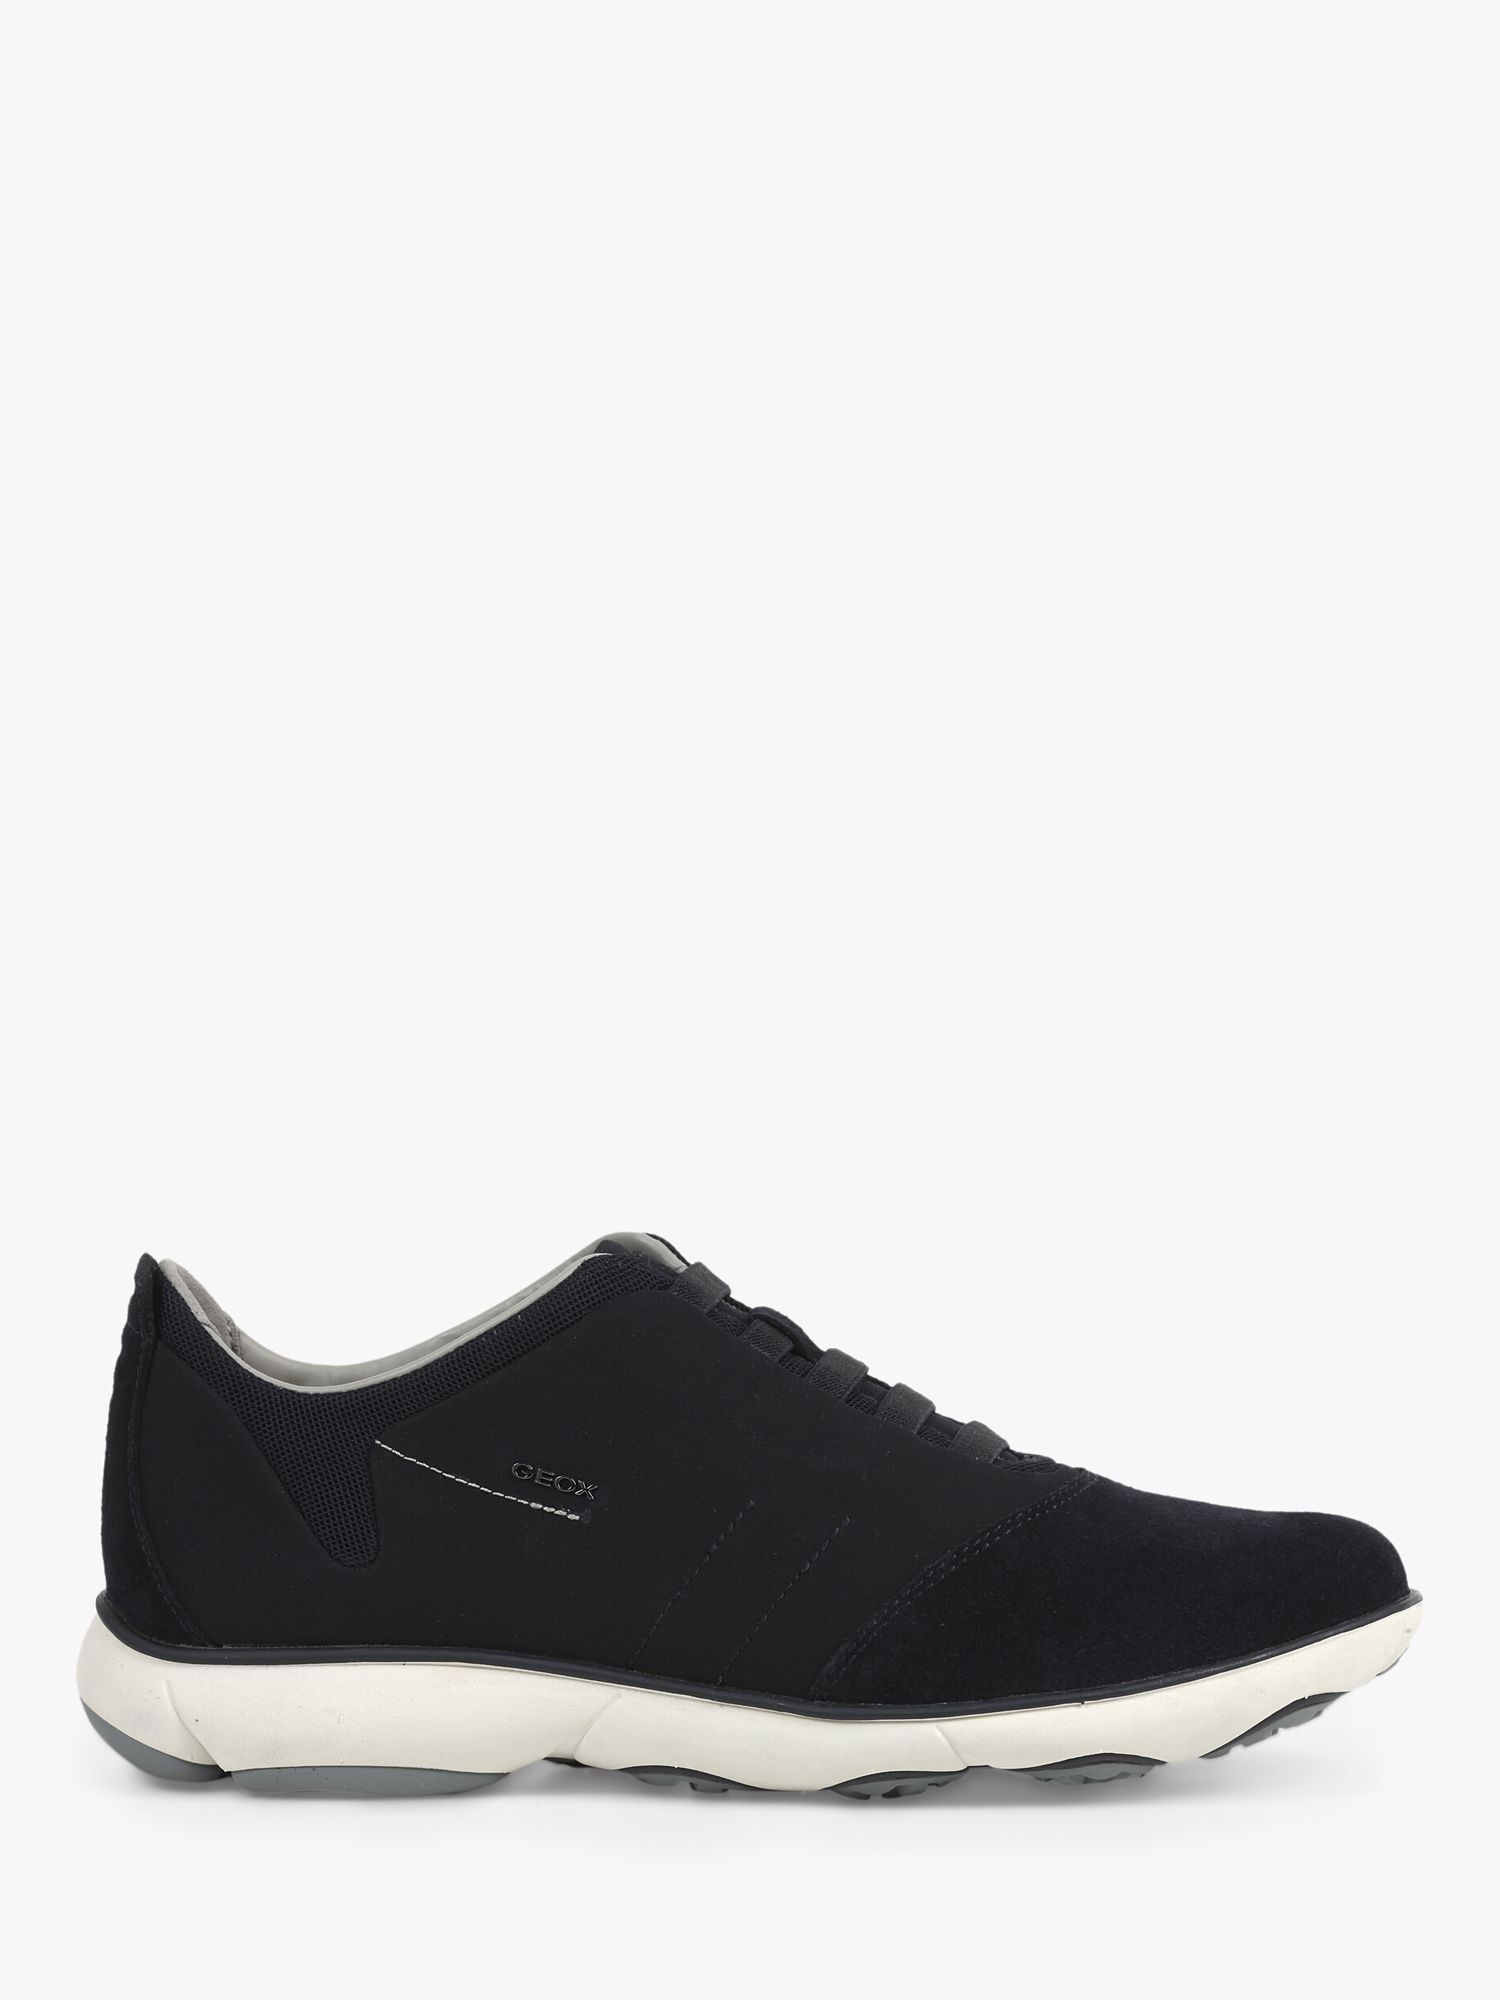 Geox Nebula Trainers, Navy at John Lewis & Partners